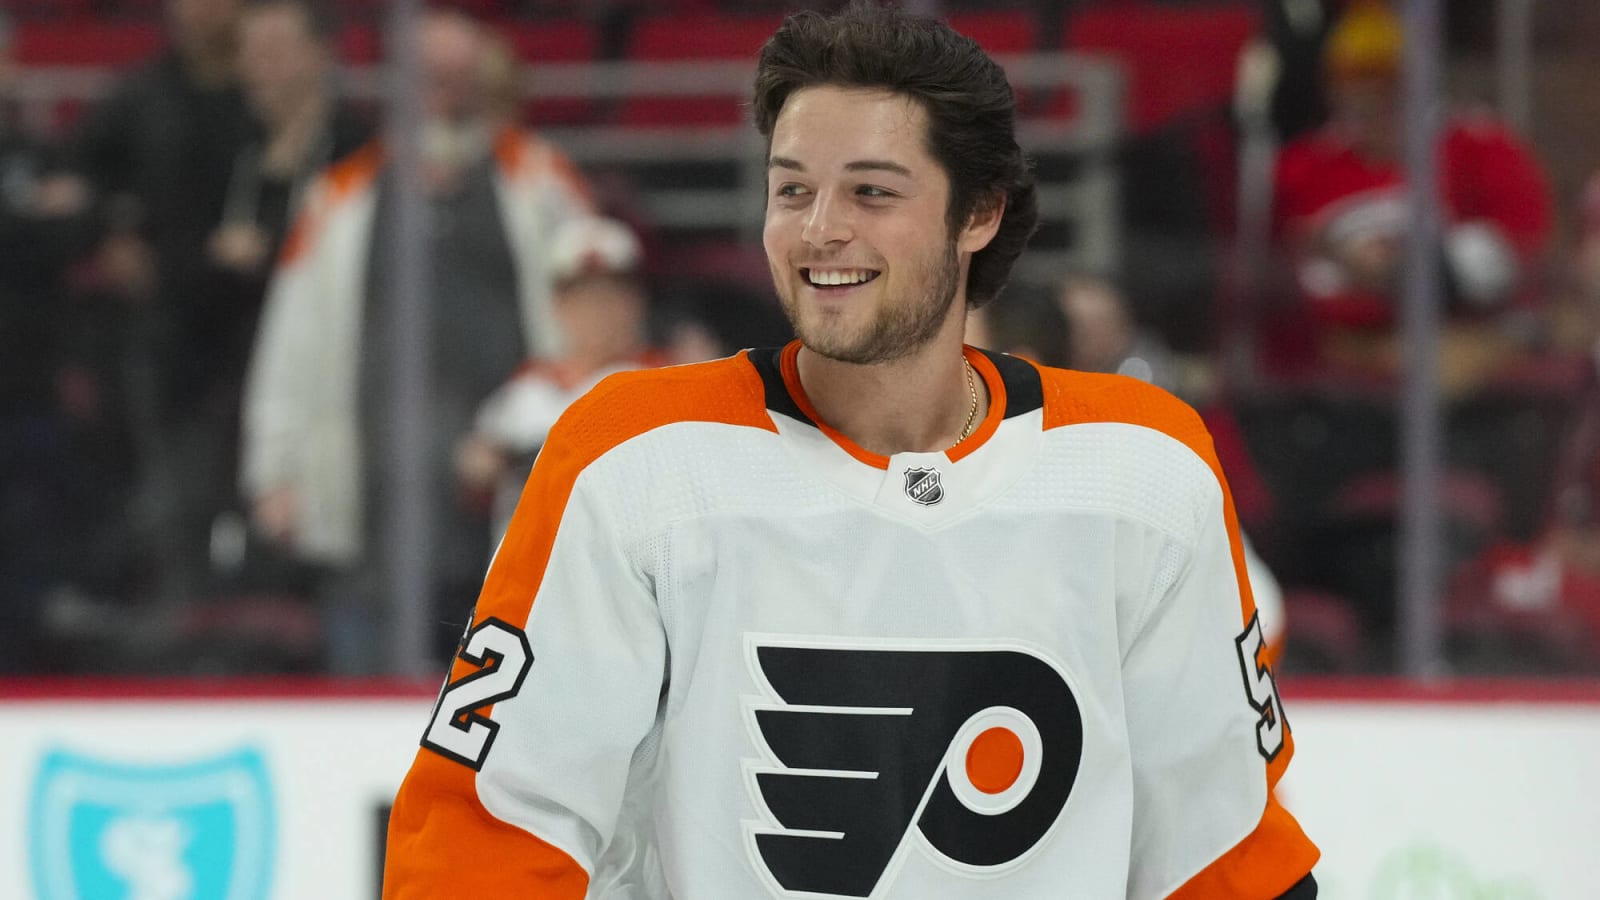 Flyers May Have a Core Player in Foerster